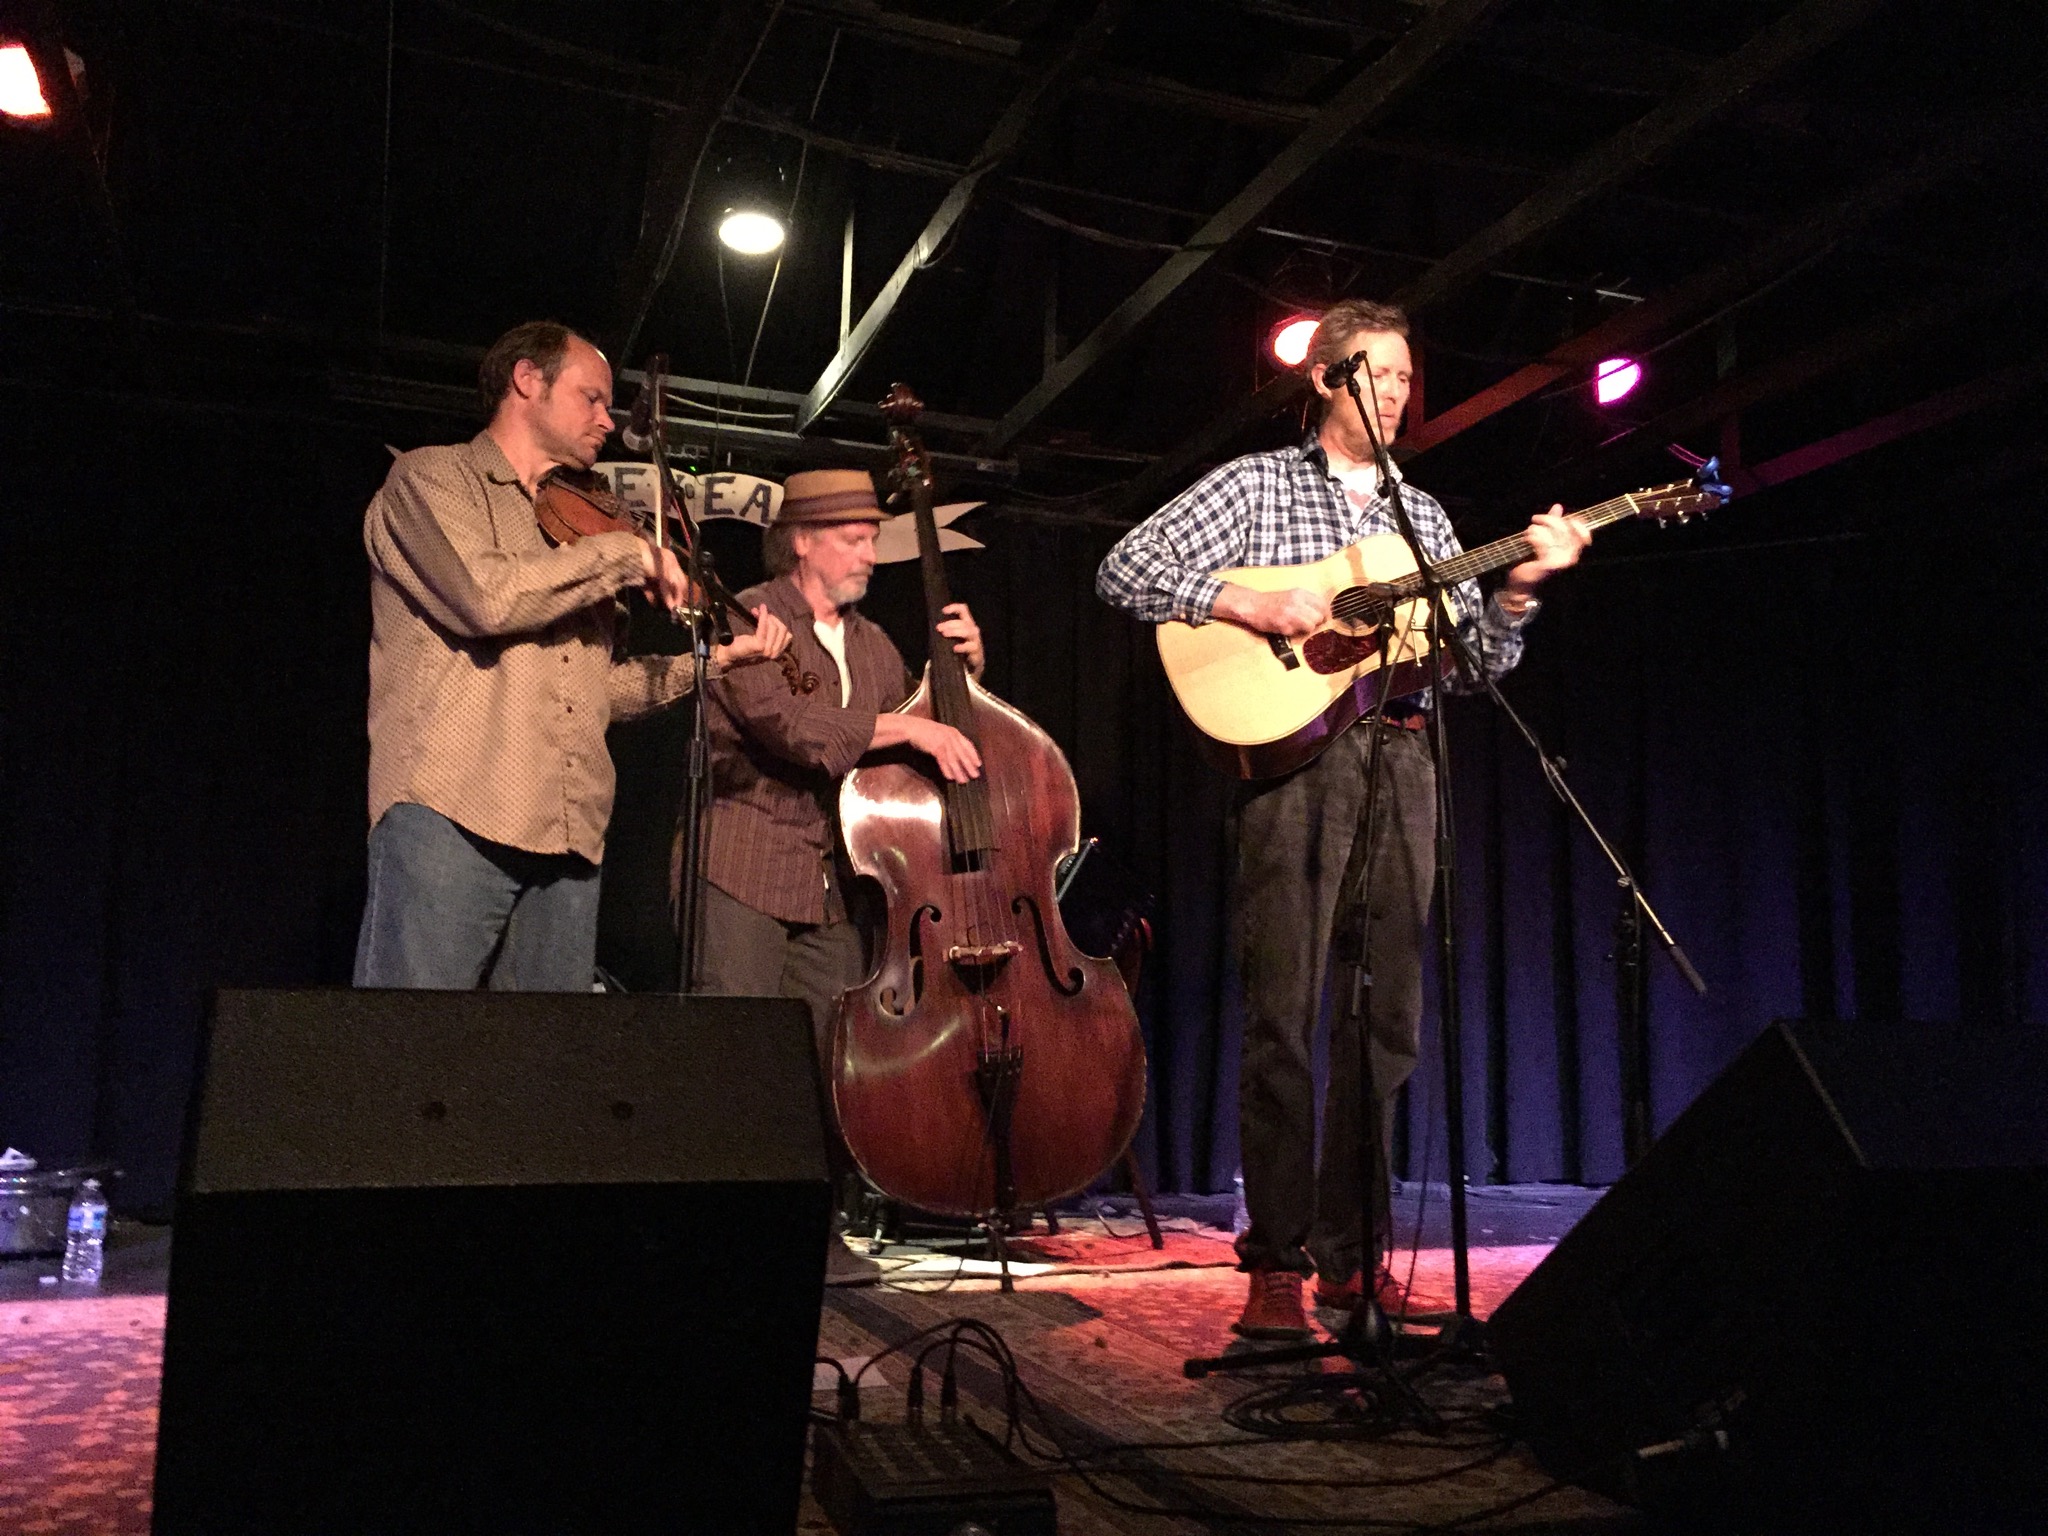 L-R: Shad Cobb, Todd Phillips, and Robbie Fulks at the Grey Eagle in Asheville, NC.  Photo taken by and the property of FourWalls.